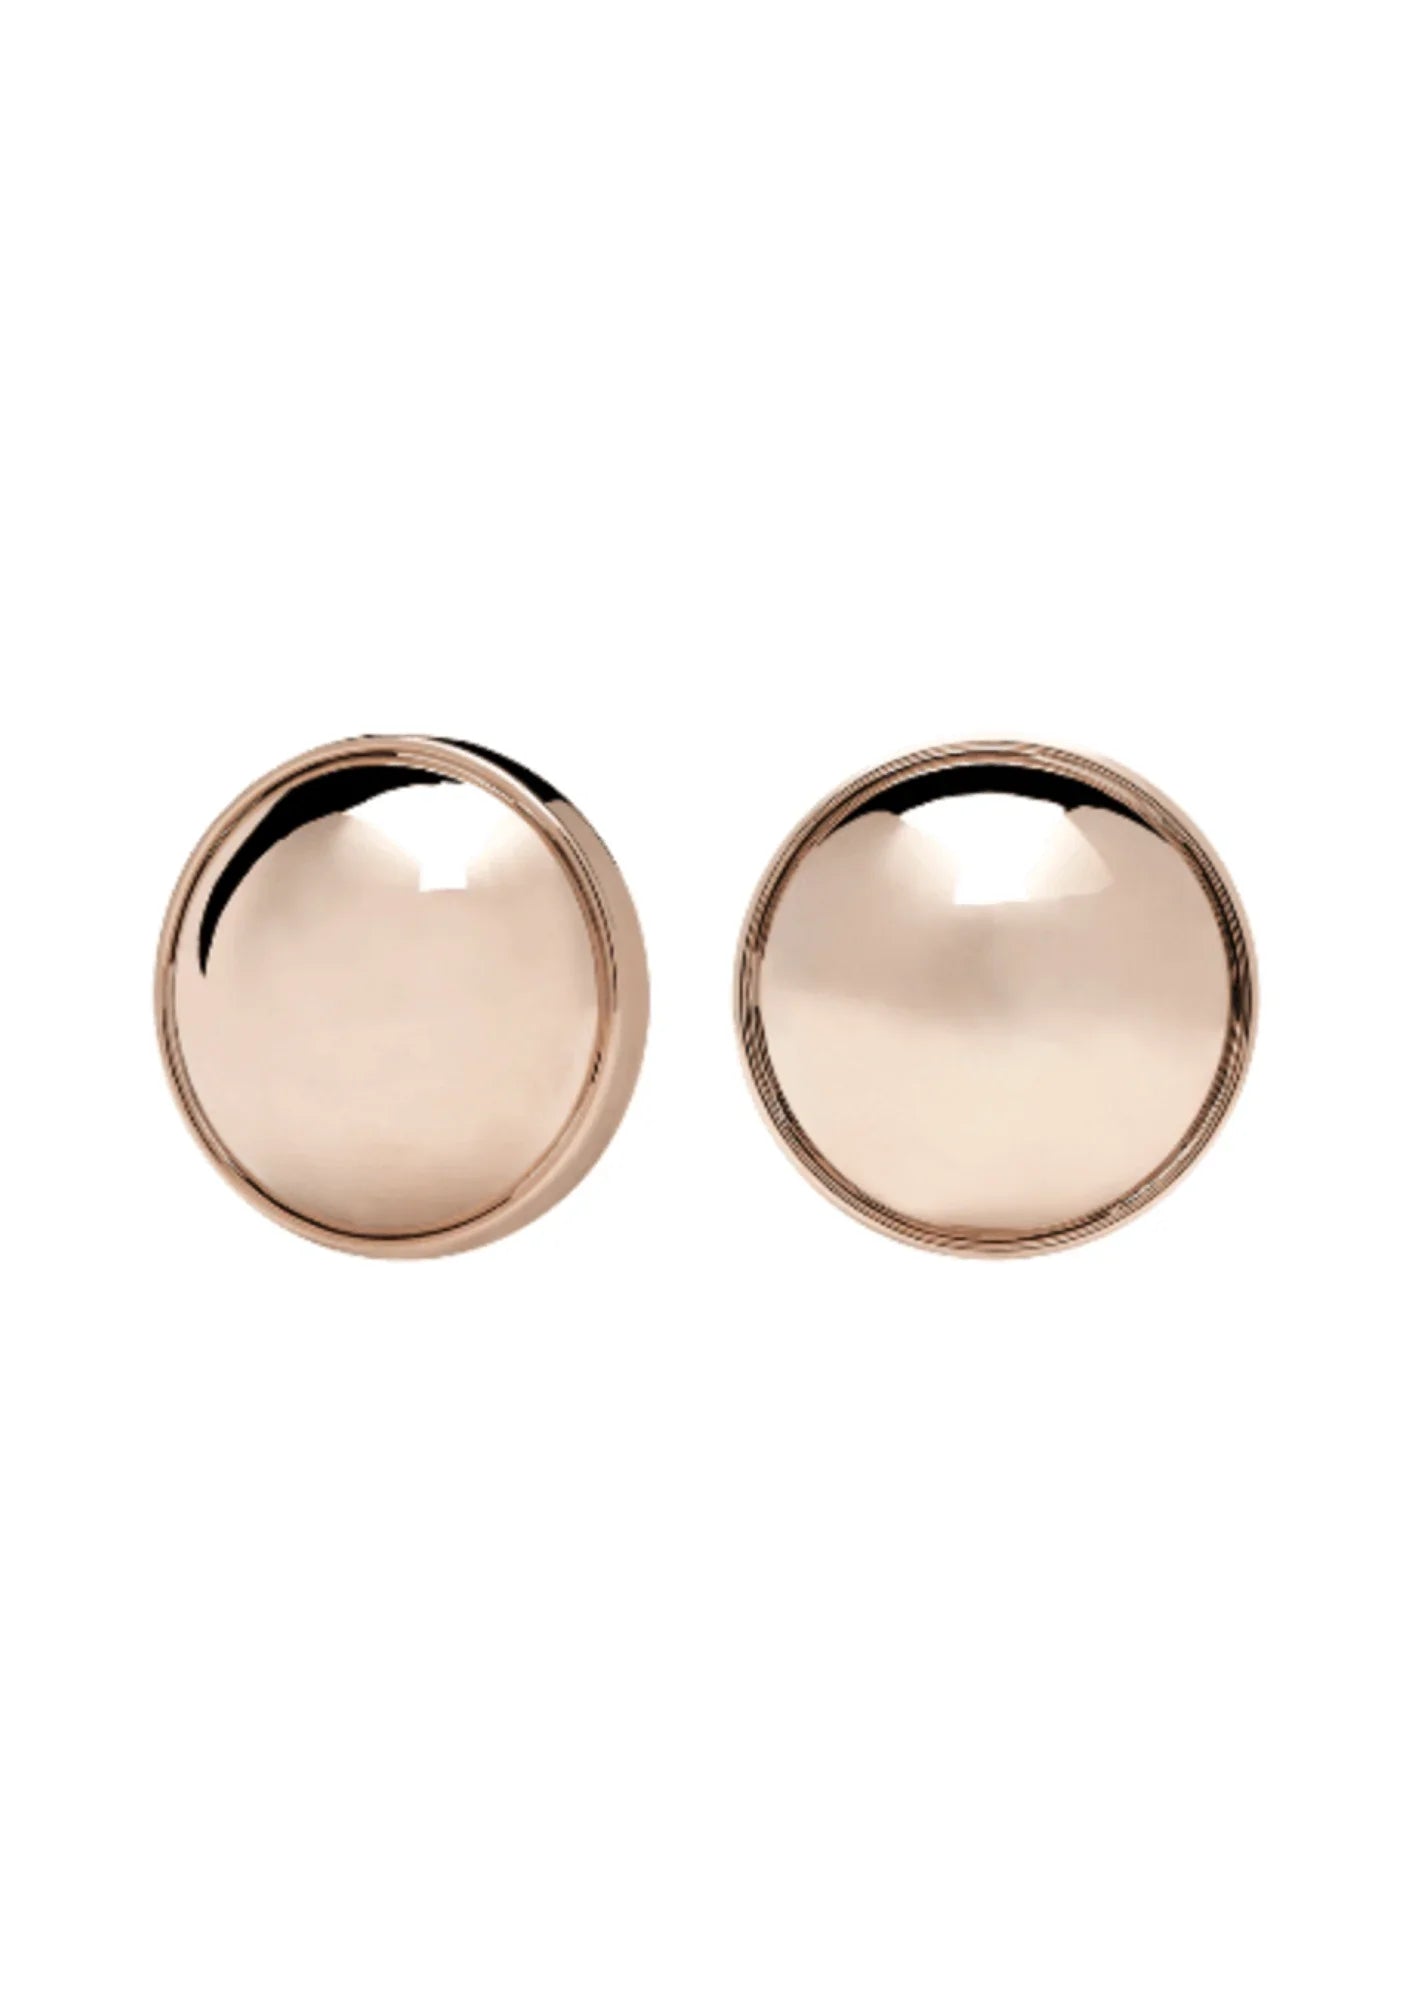 ROSE GOLD ROUND CLIP EARRINGS